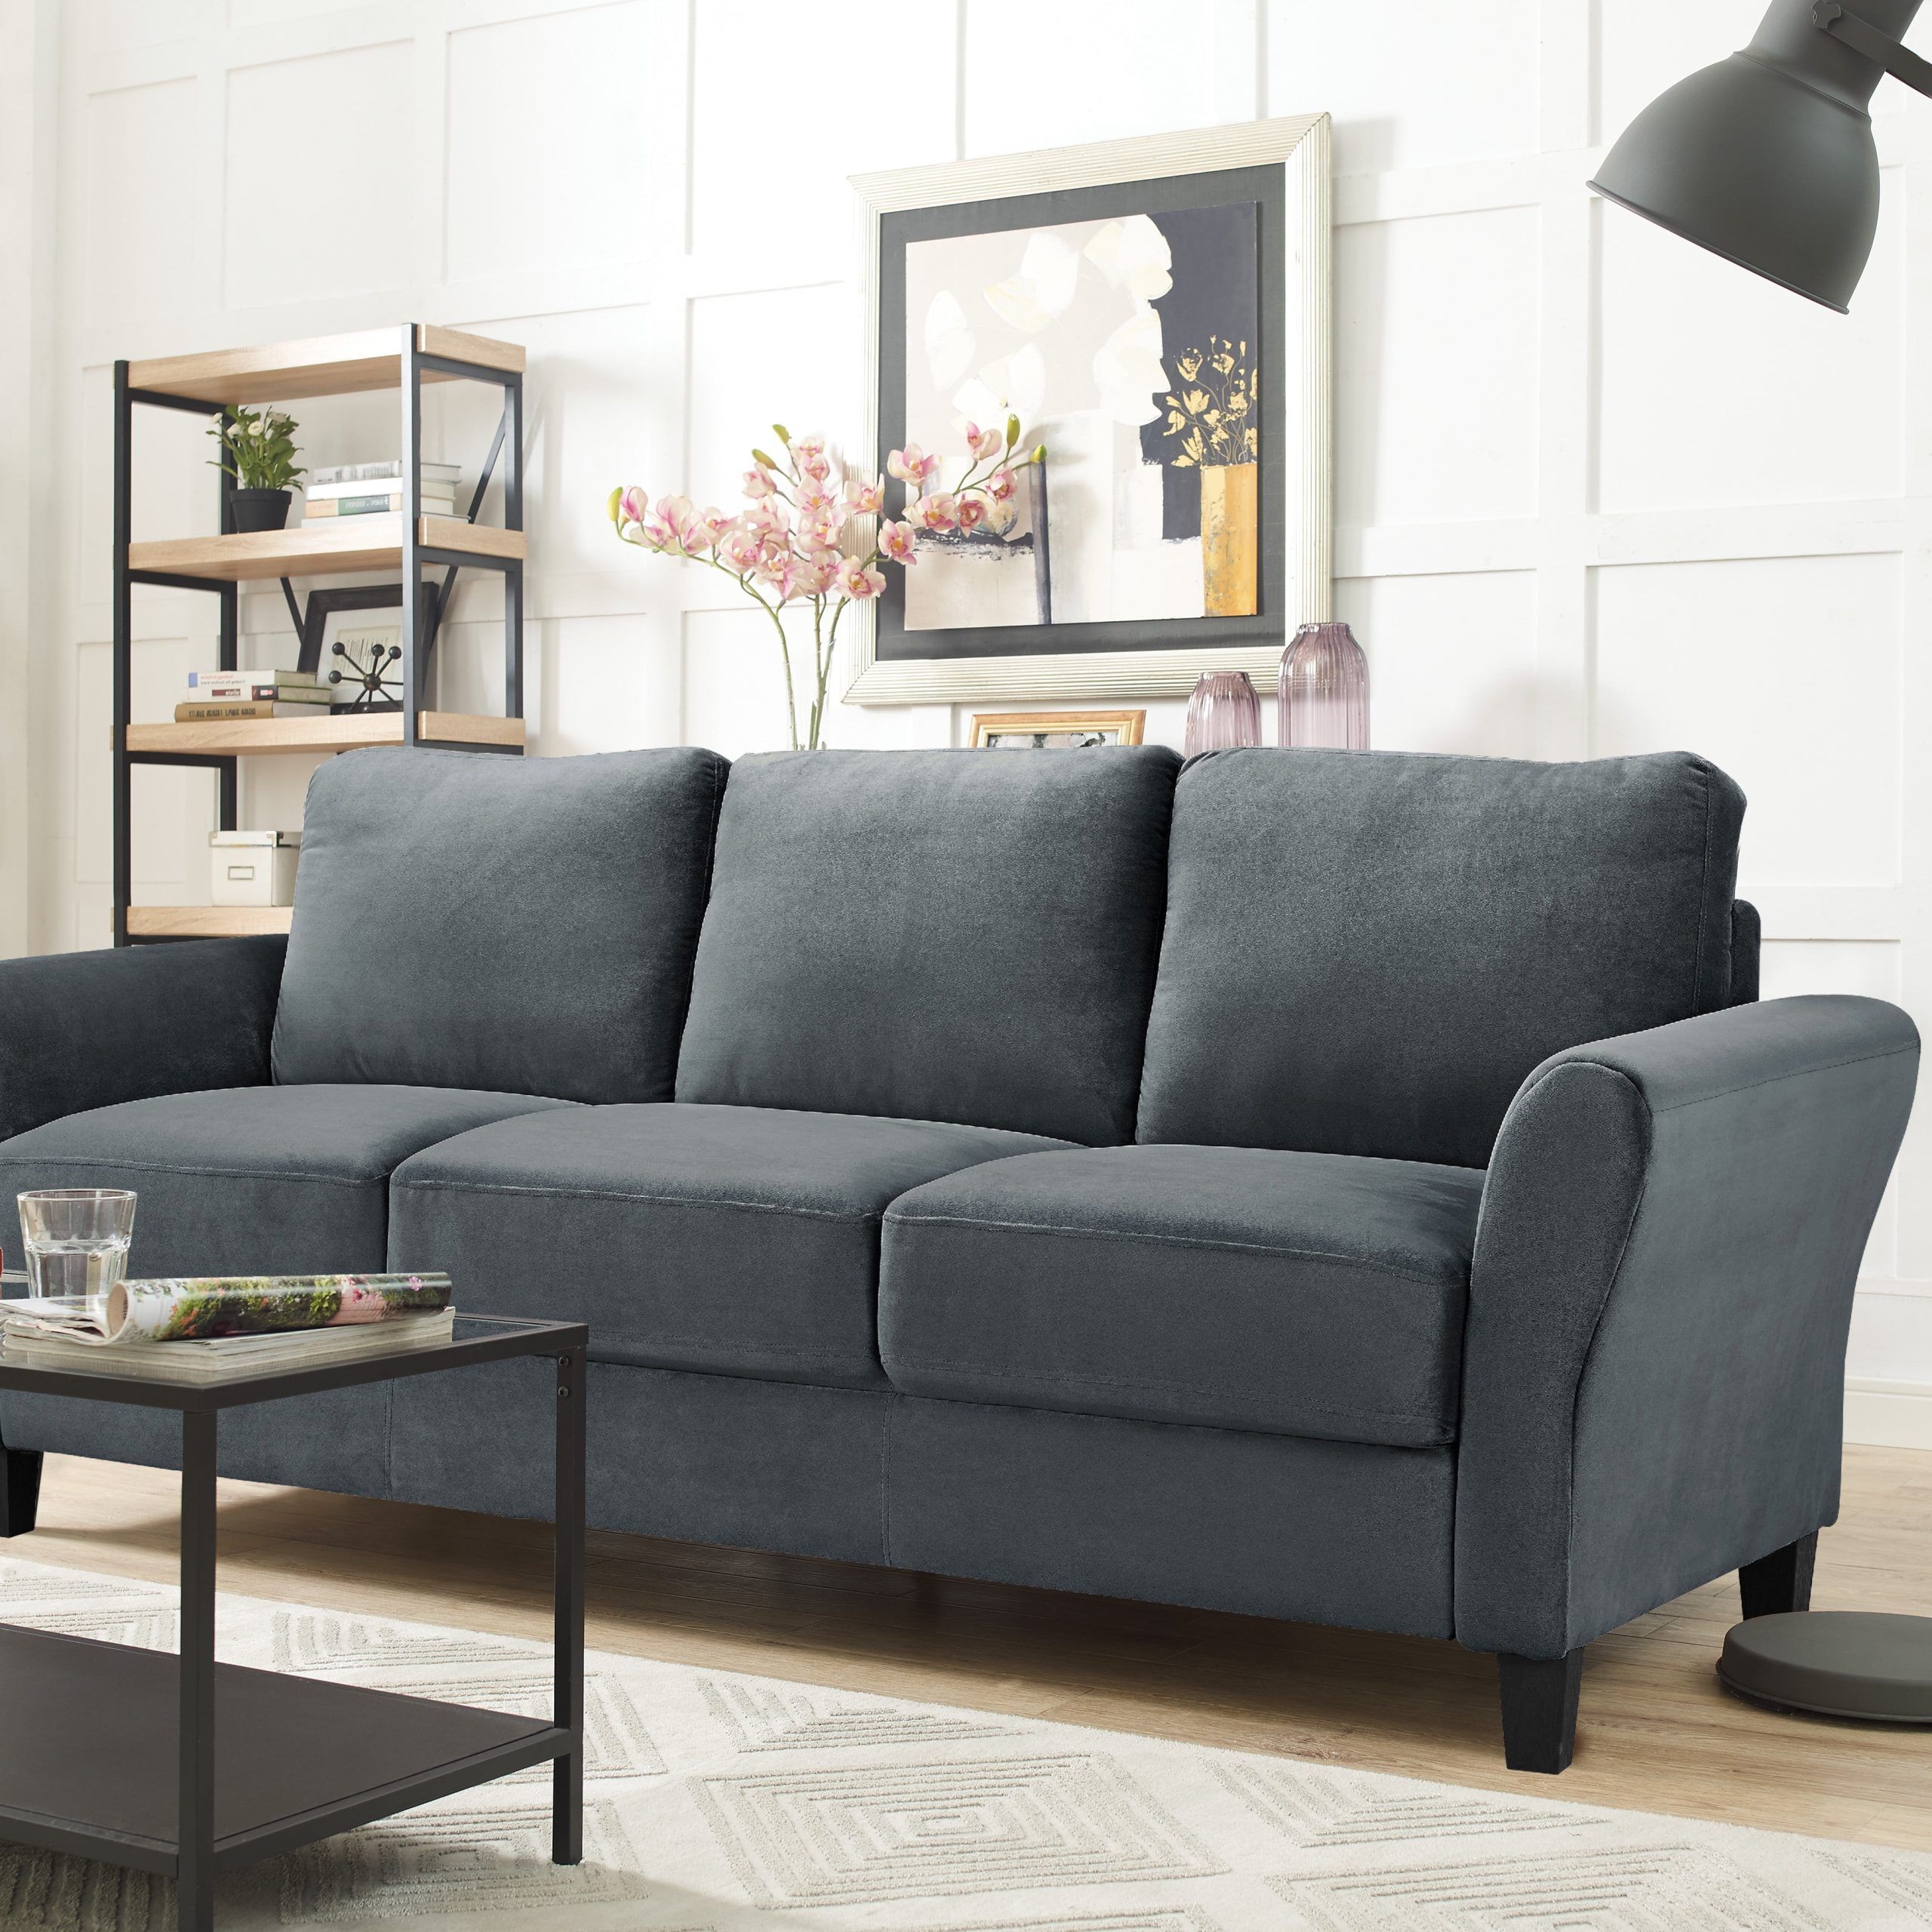 Most Recently Released Dark Grey Polyester Sofa Couches Inside Lifestyle Solutions Alexa 3 Seat Rolled Arm Microfiber Sofa, Dark Grey (View 2 of 15)